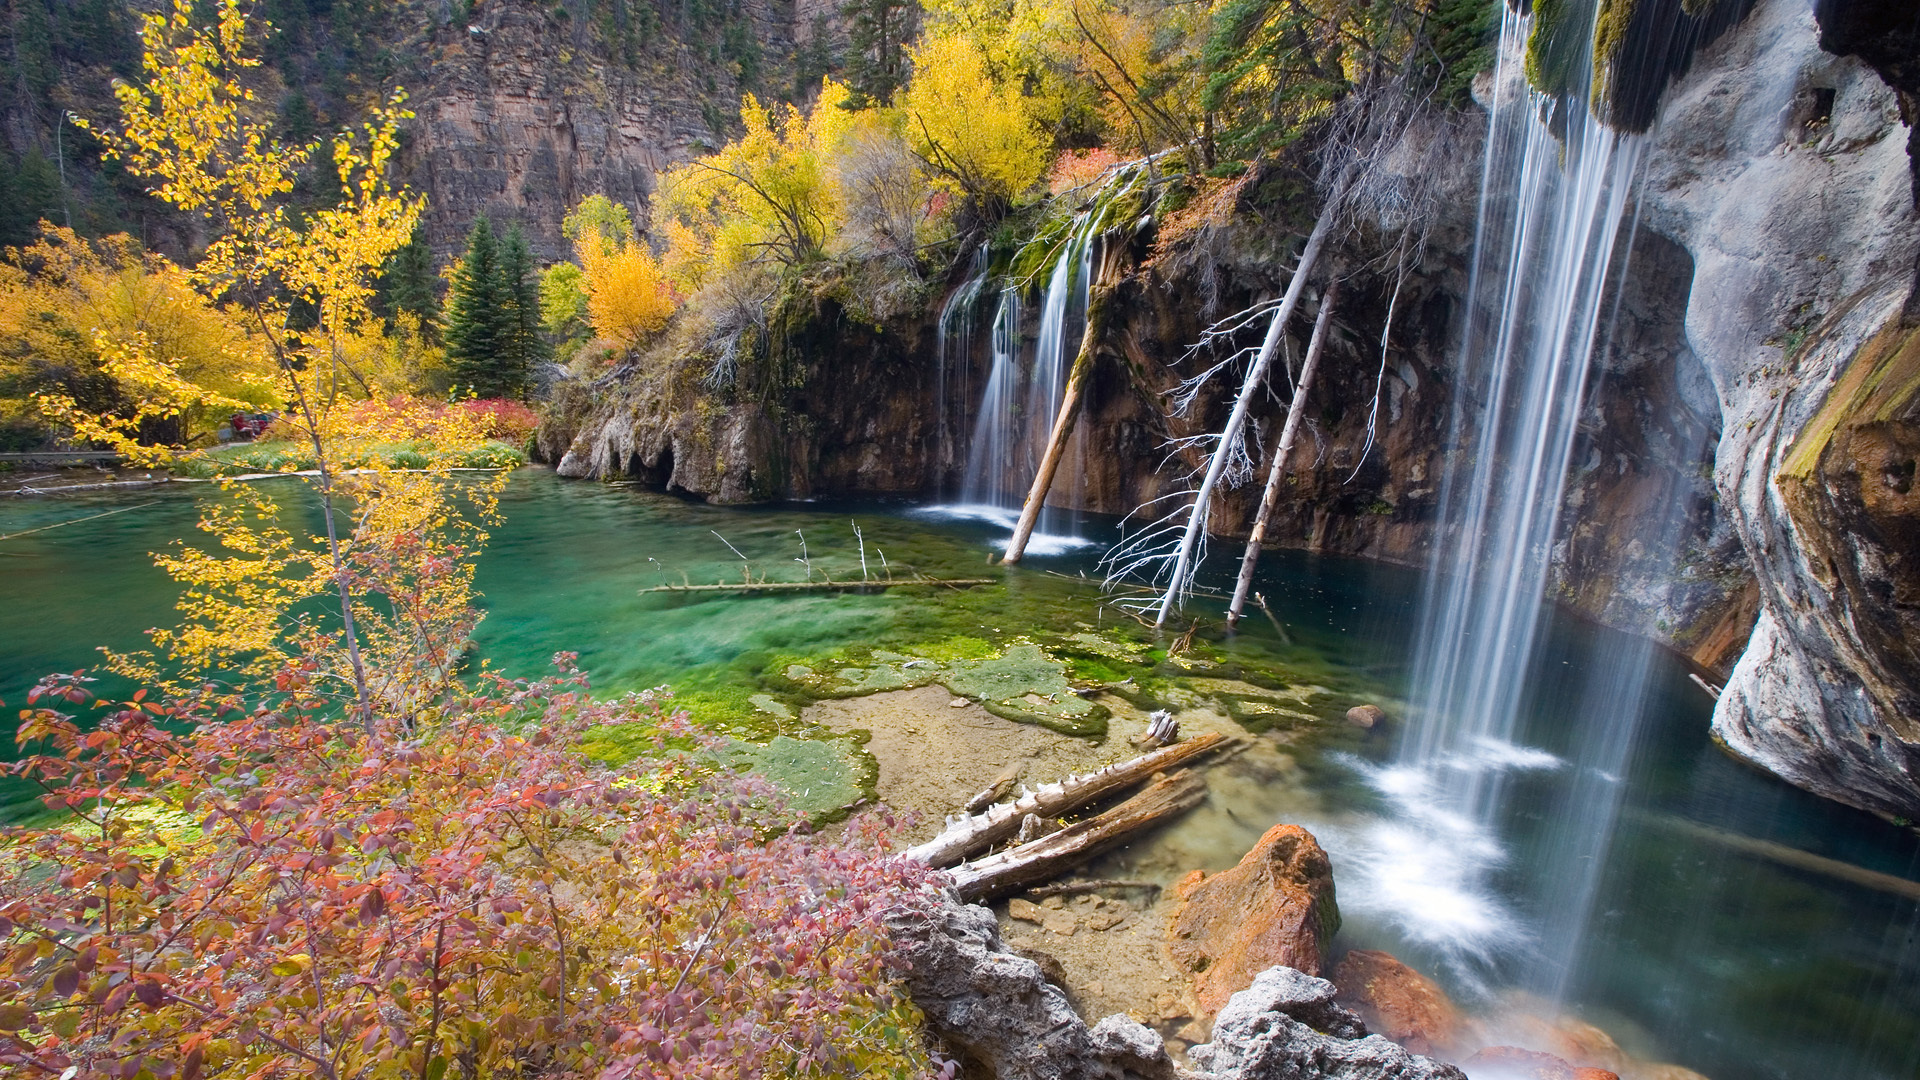 streams, Rivers, Water, Nature, Landscapes, Waterfalls, Trees, Autumn, Fall Wallpaper